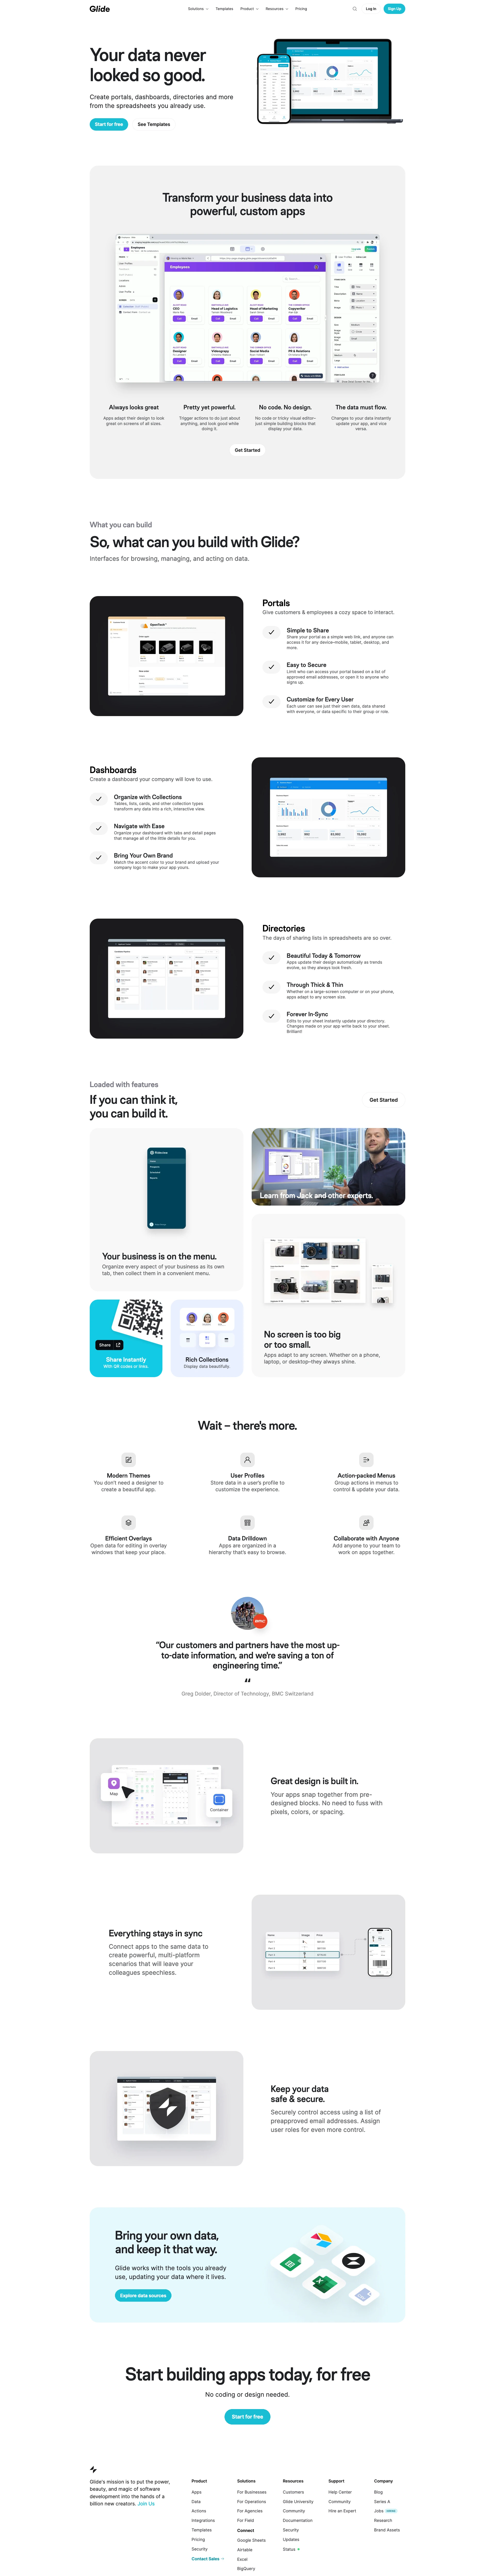 Glide Landing Page Example: Build AI-powered apps with Glide, the leading no-code platform for app development. Glide makes it easy to build and deploy custom tools your business needs and team will love — with clicks, not code.